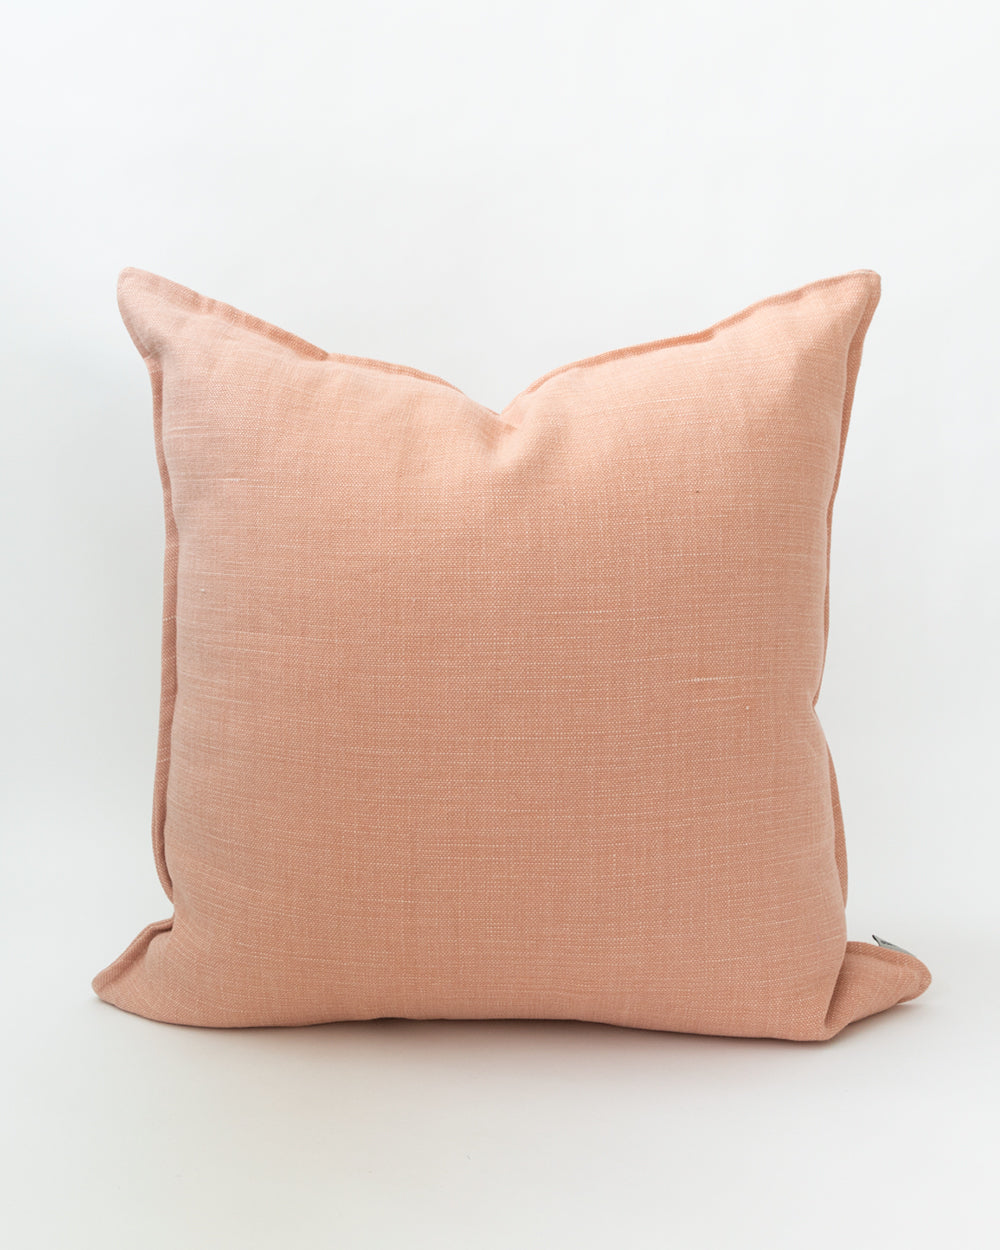 Square solid pink linen pillow.